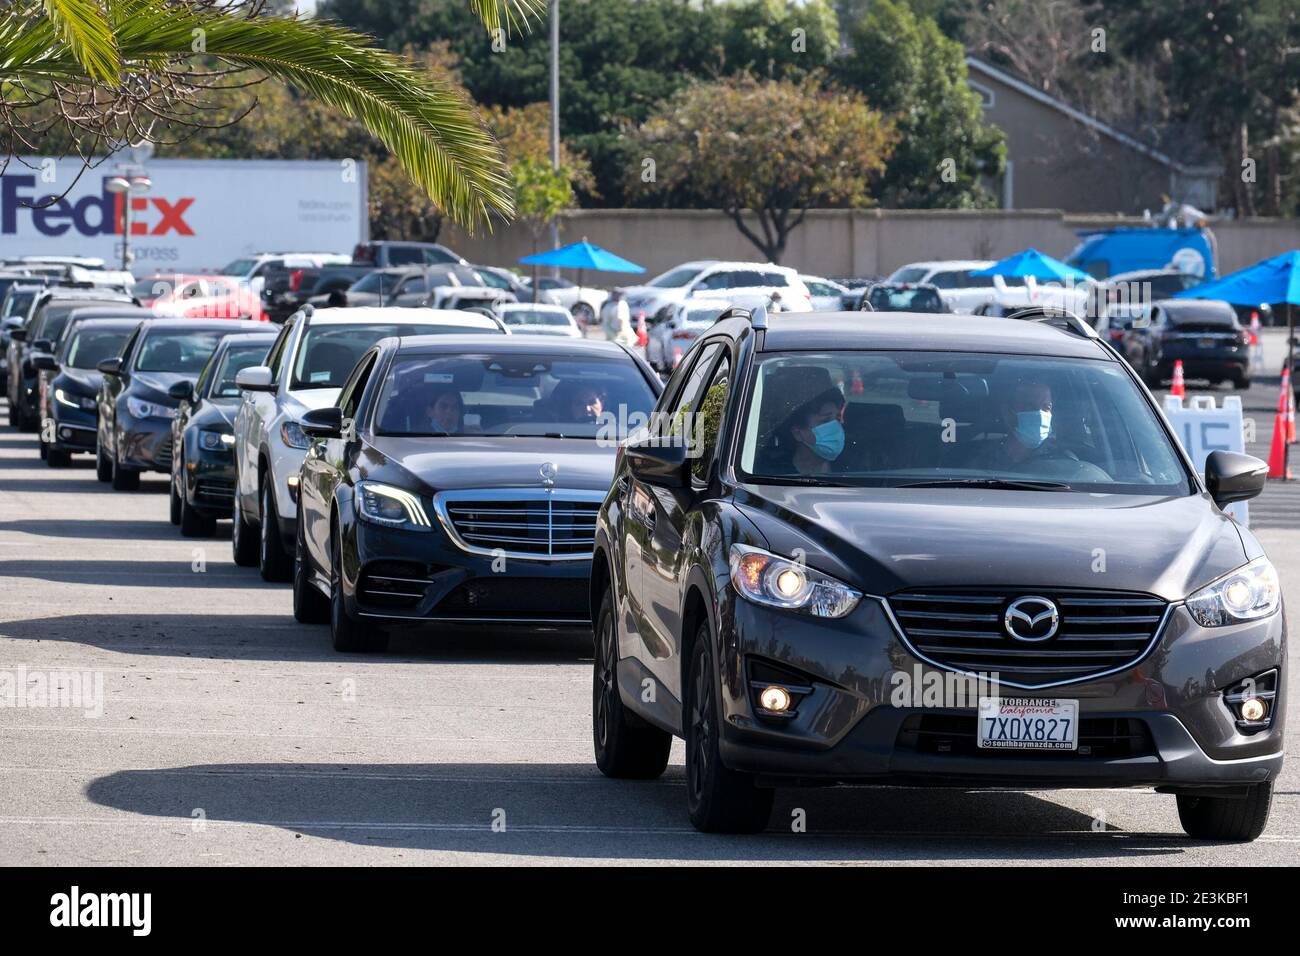 Los Angeles, California, USA. 19th Jan, 2021. Motorists wait in lines to get the coronavirus (COVID-19) vaccine in a parking lot at the Forum, Tuesday, Jan. 19, 2021, in Inglewood, Calif. Los Angeles County is ramping up vaccination efforts in its battle against the coronavirus, opening 5 large-scale vaccine sites to complement 75 smaller locations and the city-operated center at Dodger Stadium. The new county centers are located at Six Flags Magic Mountain, Cal State Northridge, the Pomona Fairplex, the L-A County Office of Education in Downey and the Forum in Inglewood. L-A officials have Stock Photo